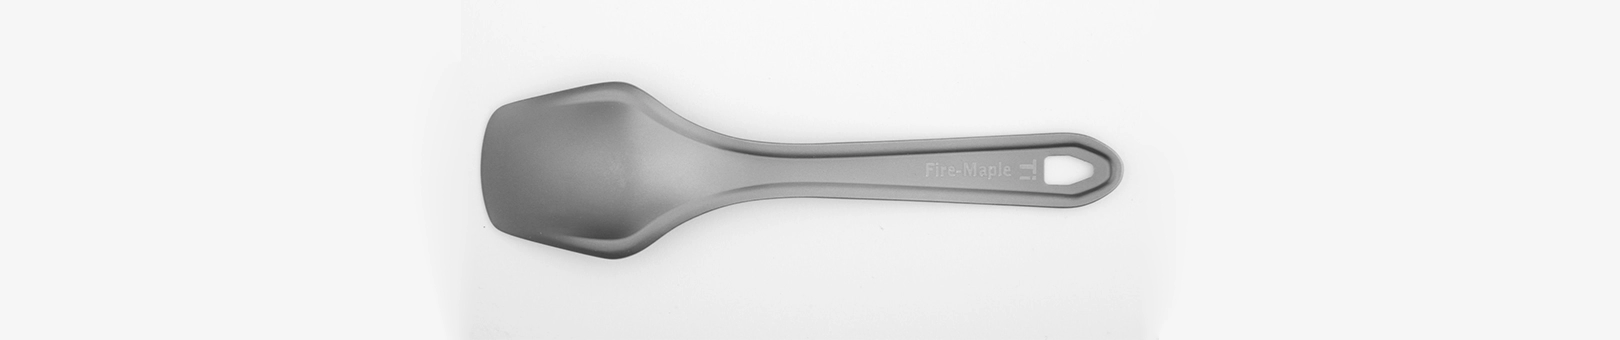 details of Ultralight Titanium Spoon For Outdoor Picnic